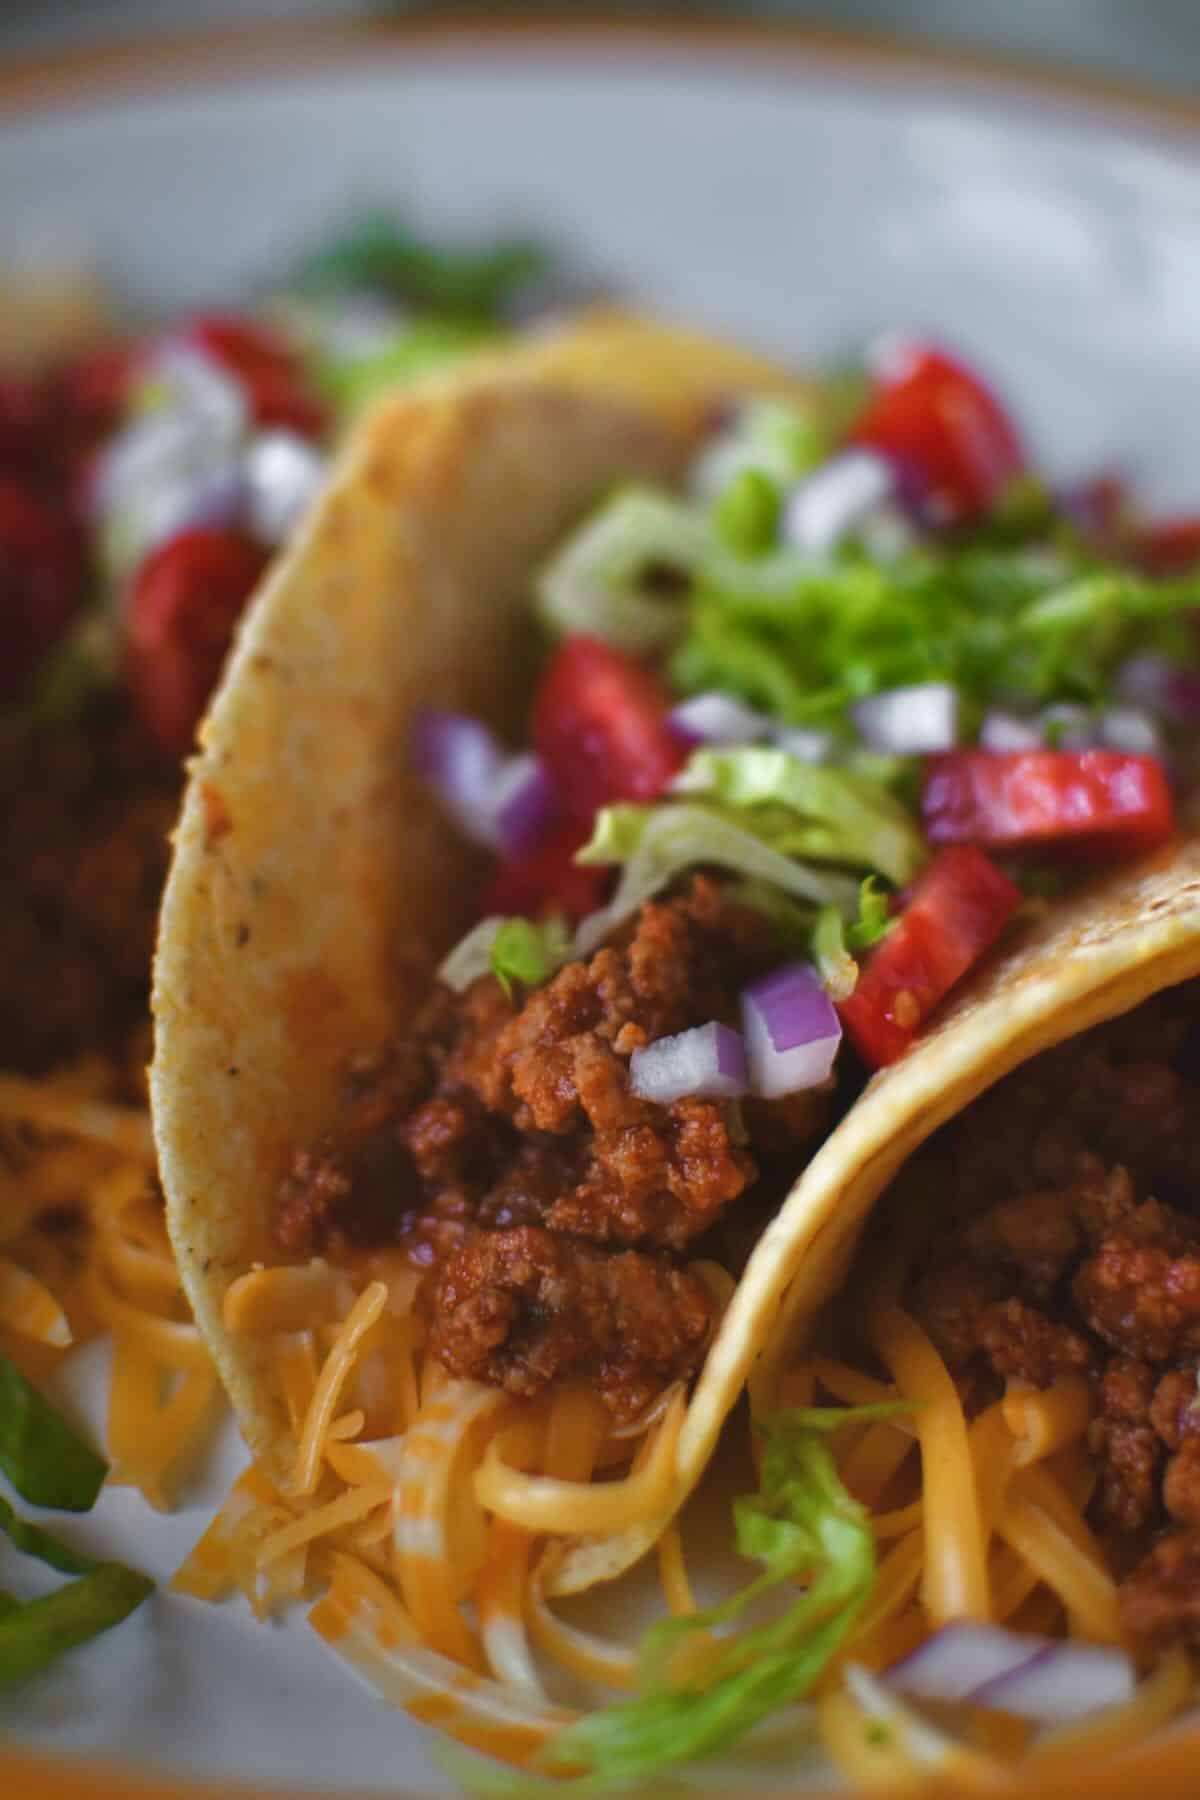 Ground Turkey Tacos lined up on a plate ready to eat.